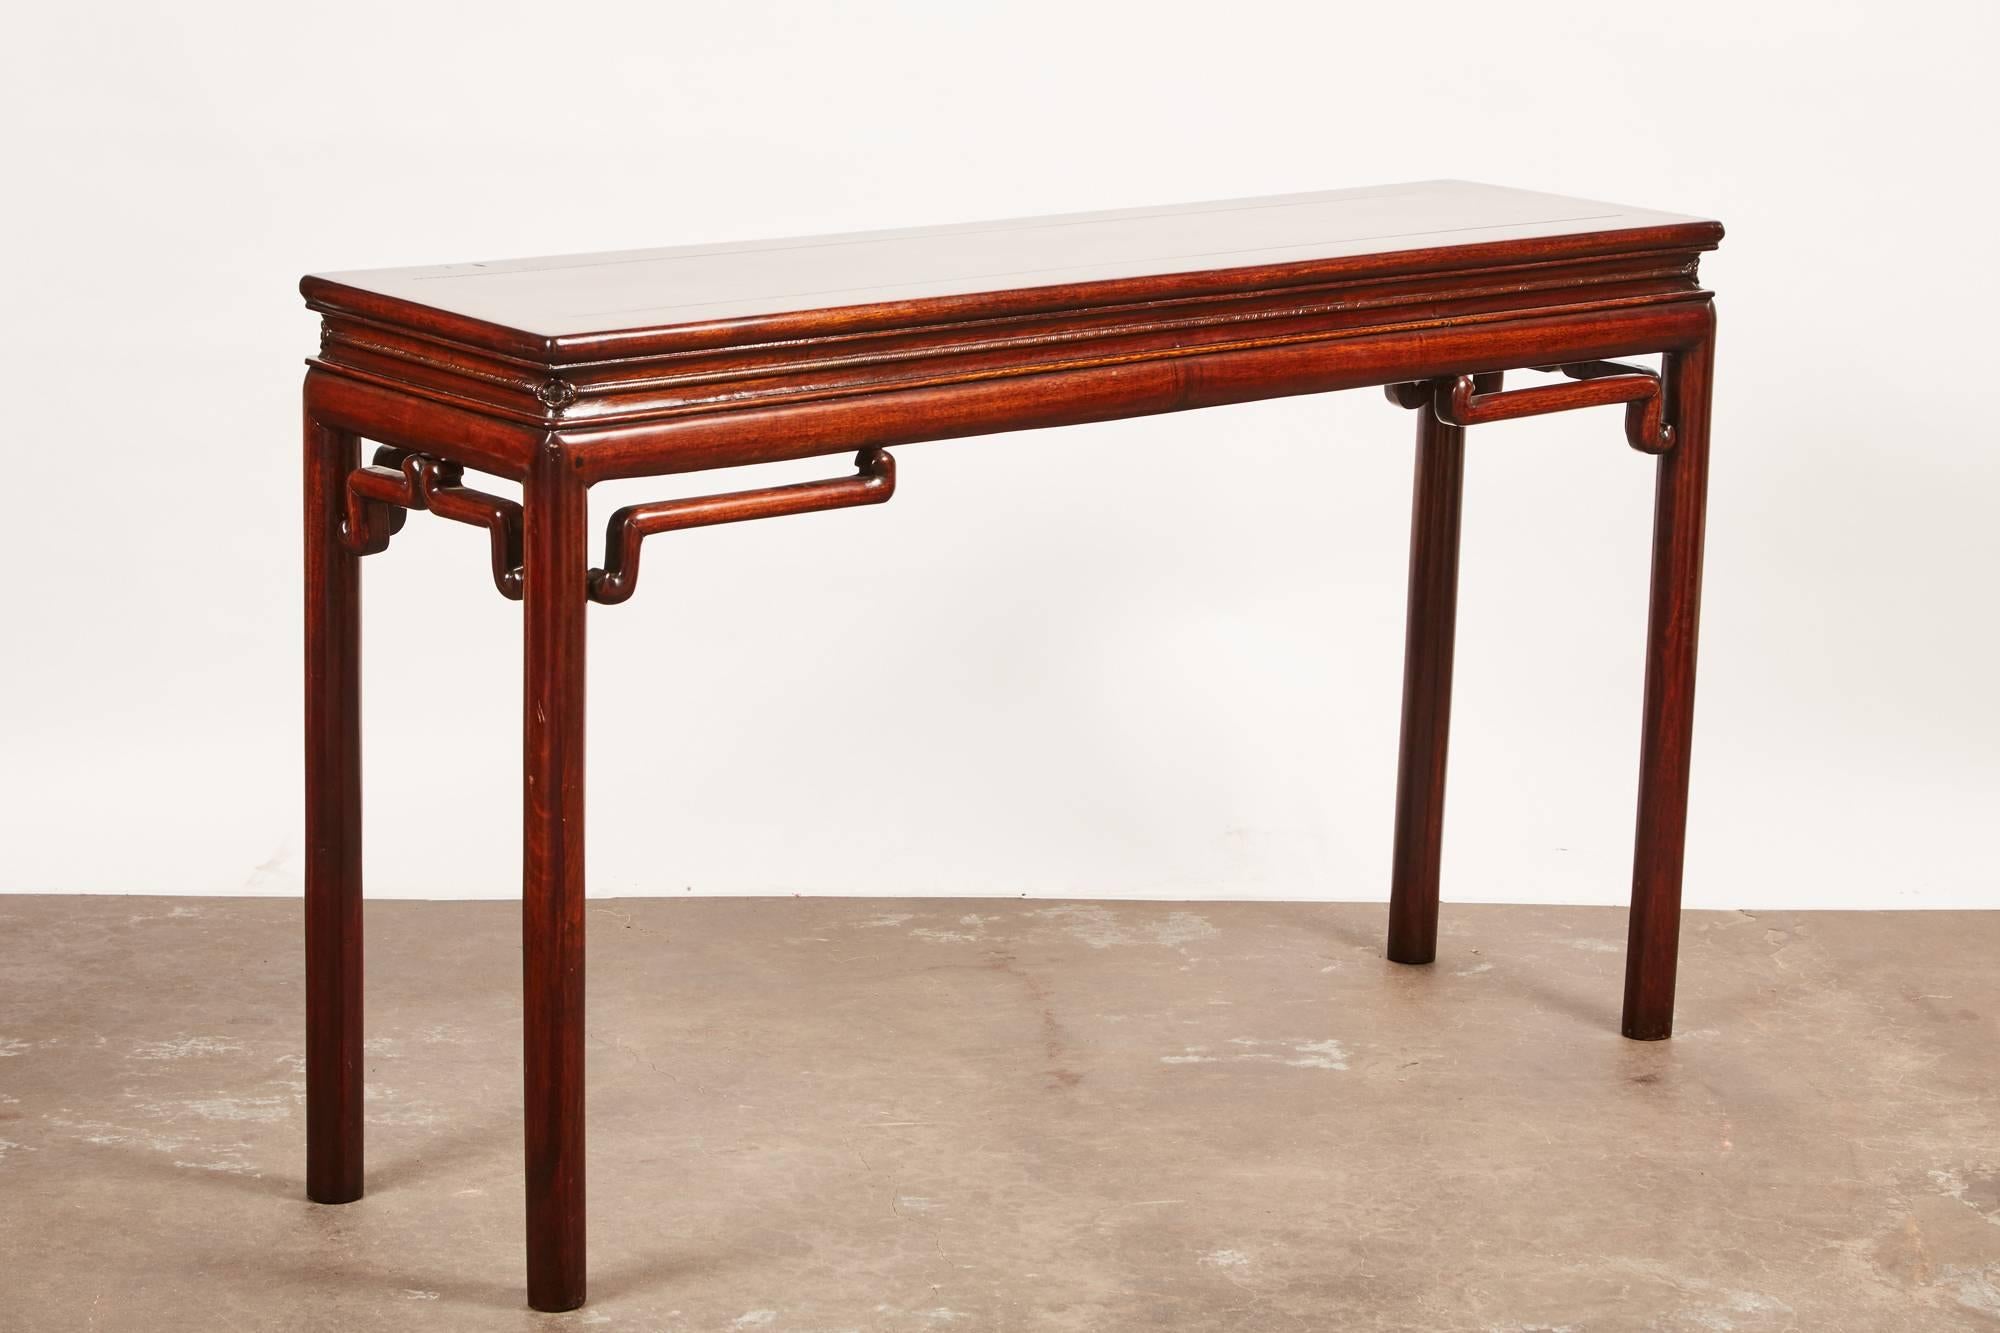 19th century rosewood altar table with delicate elbow braces.